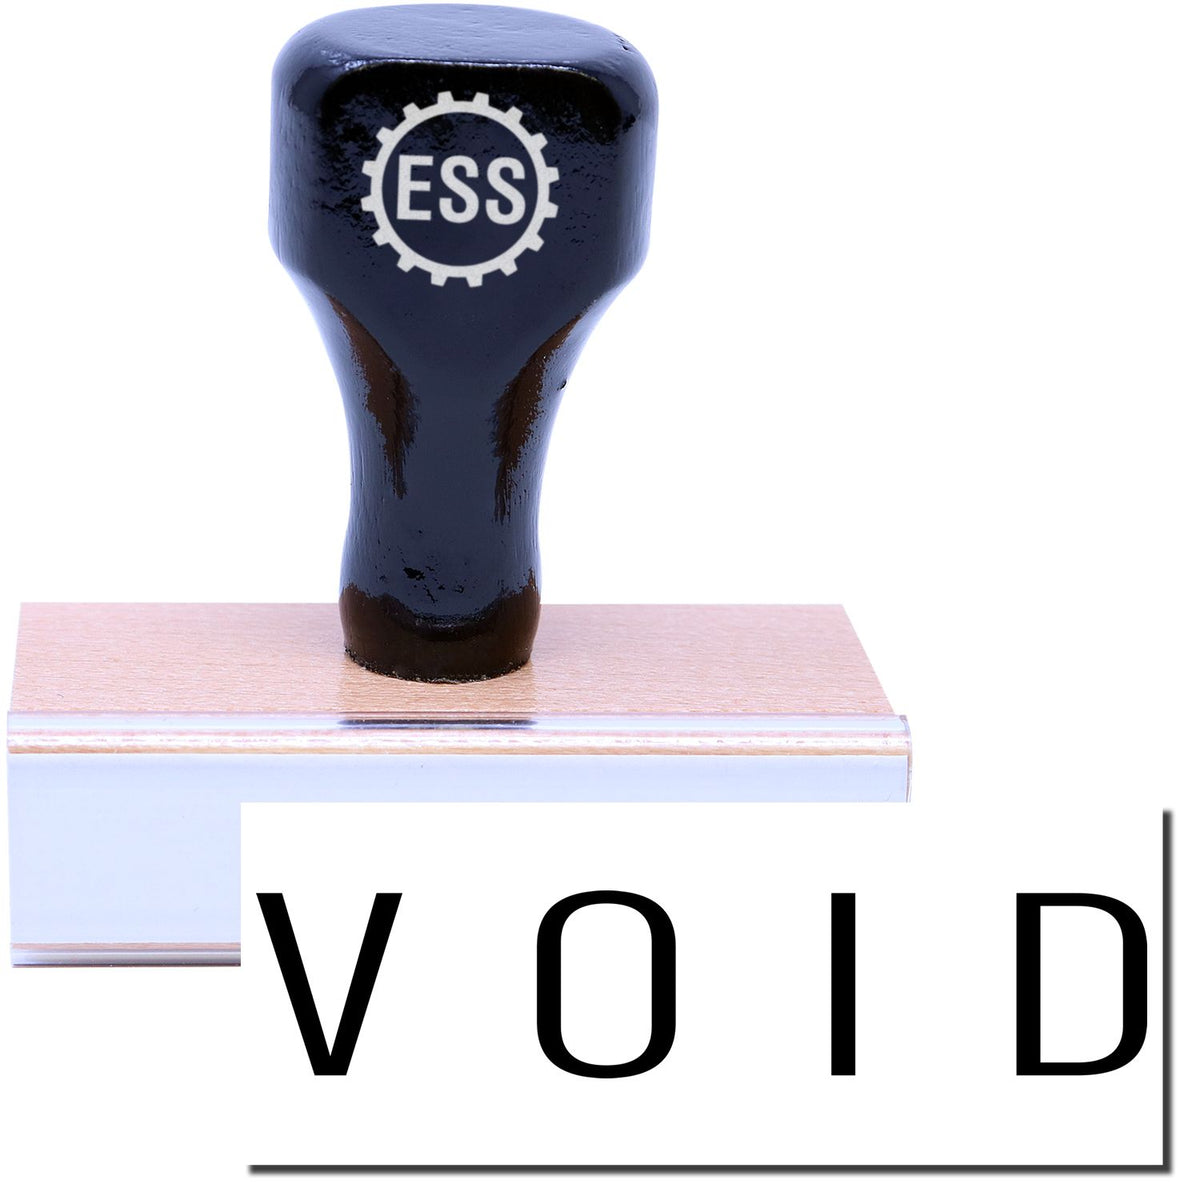 A stock office rubber stamp with a stamped image showing how the text &quot;VOID&quot; in a narrow font is displayed after stamping.